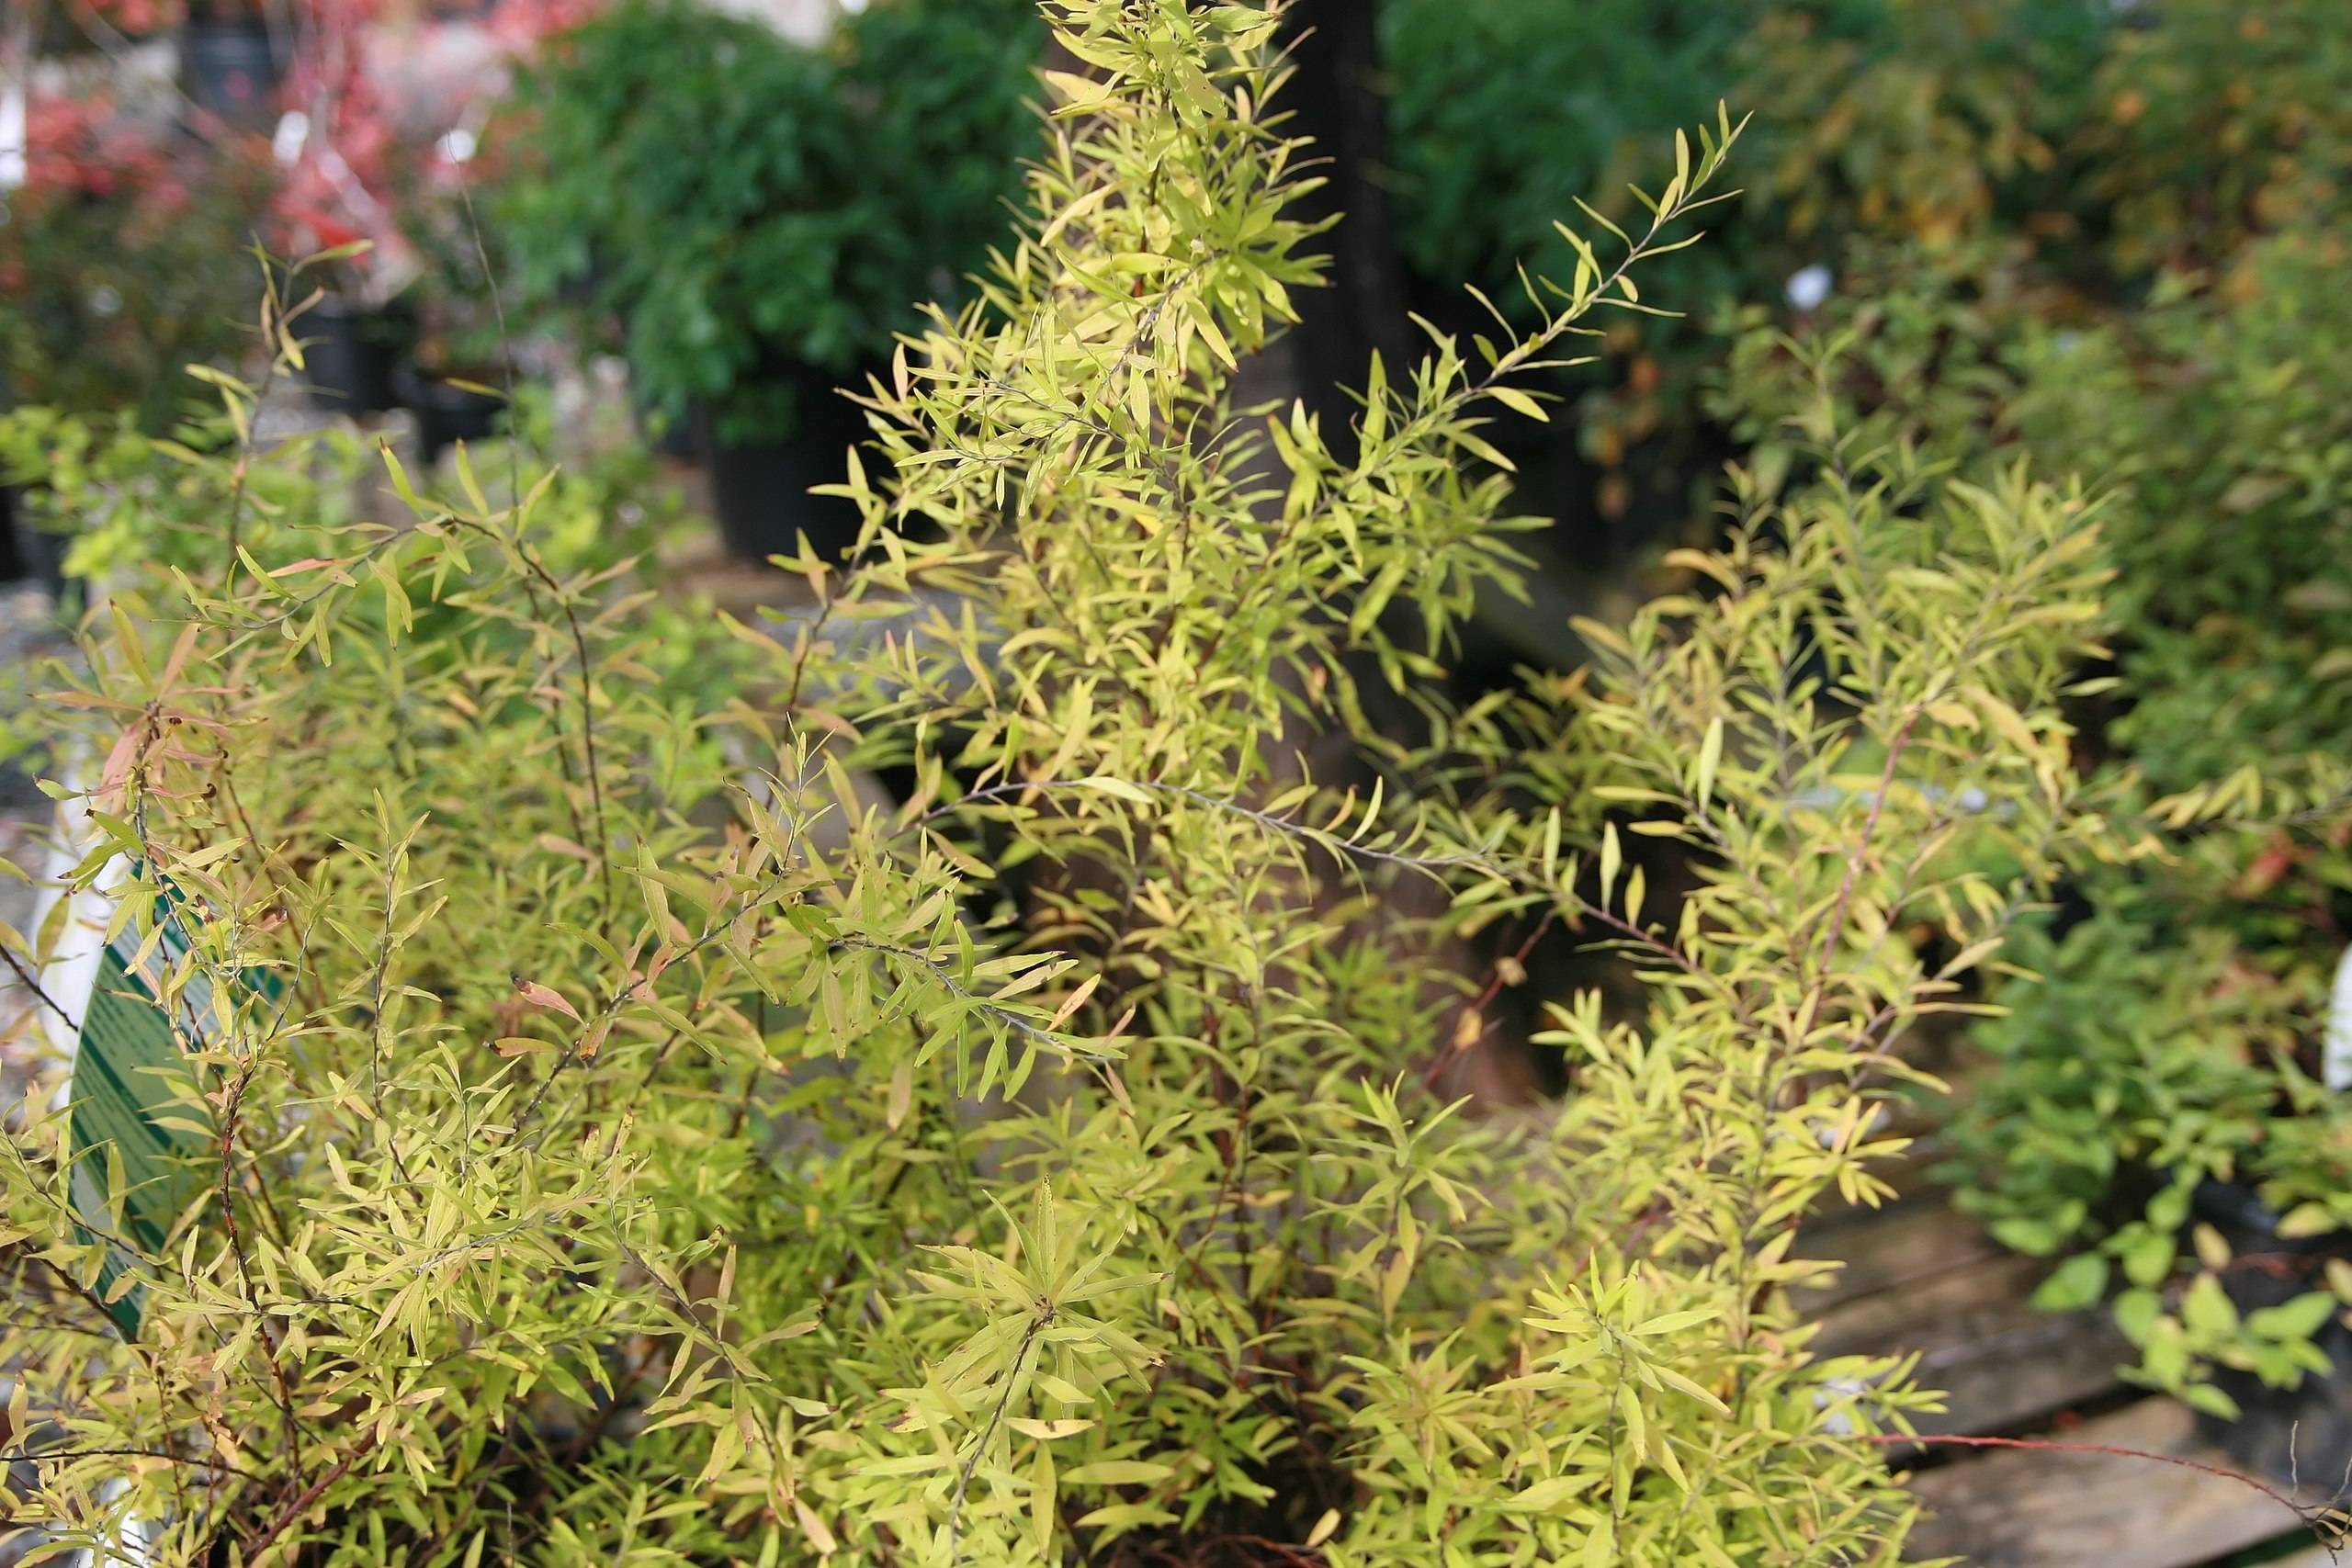 yellow-lime foliage with yellow-lime stems